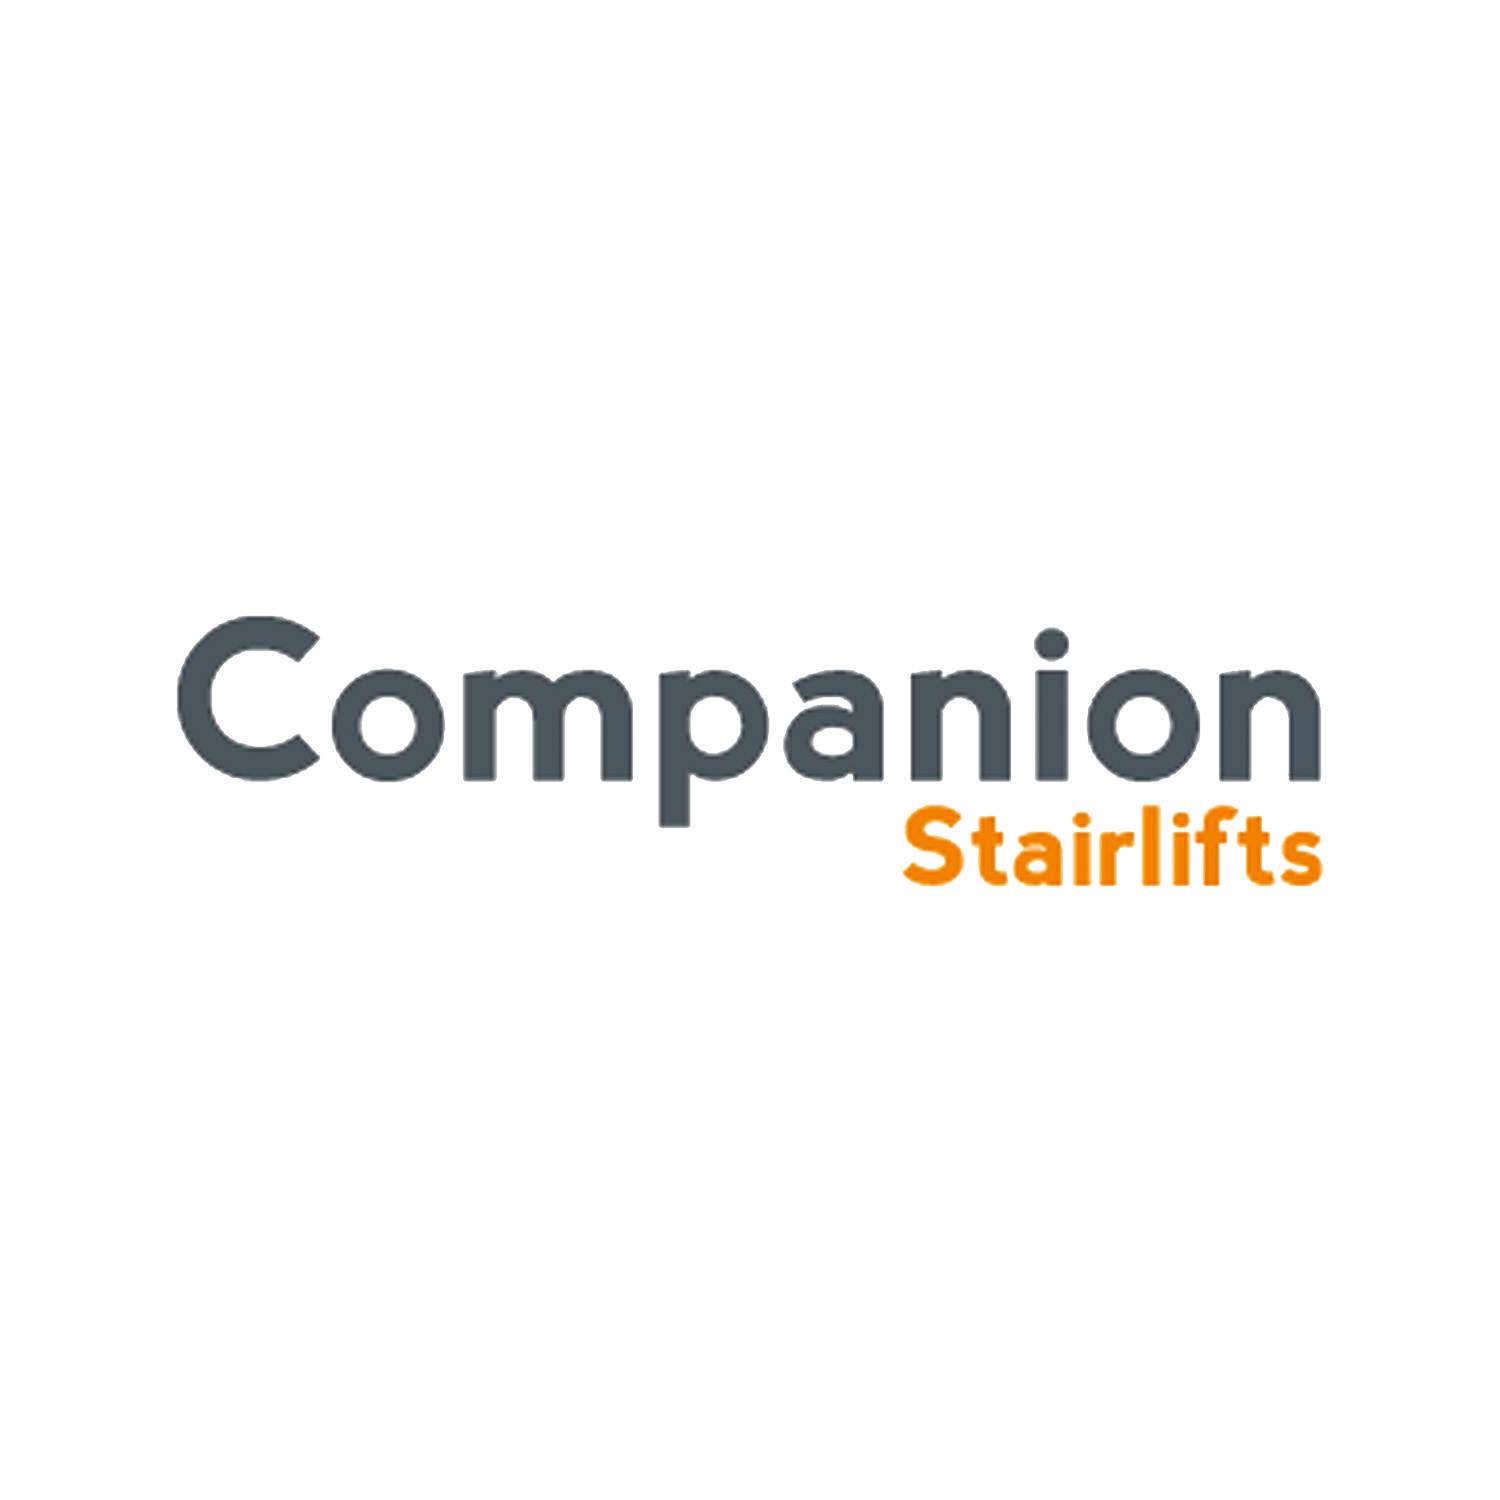 companion stairlifts logo